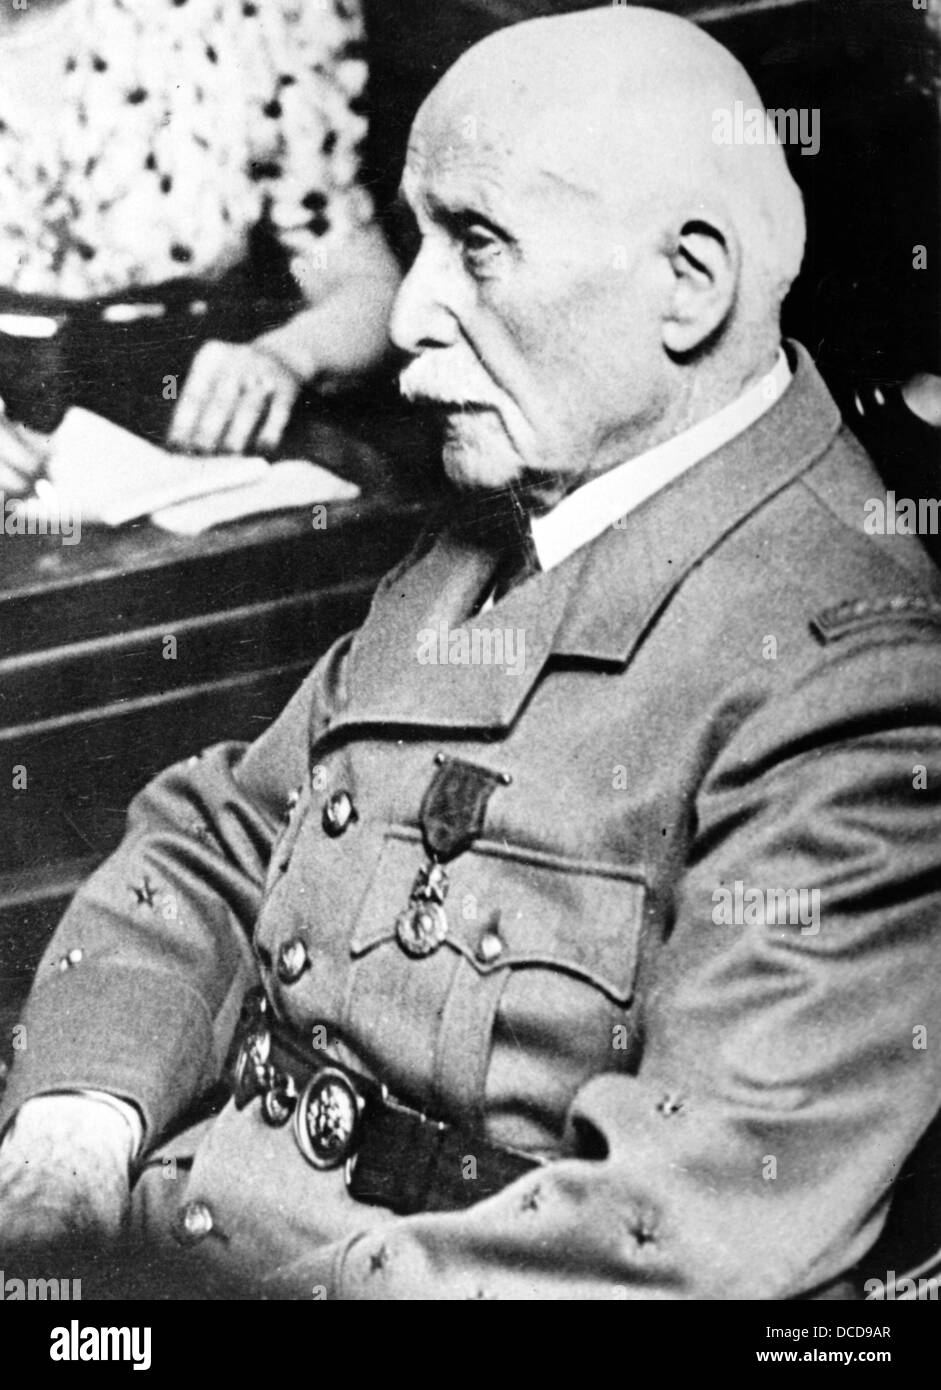 Portrait of Marshal Philippe Pétain, Chief of State of the so-called Vichy France, during his trial about his collaboration, in Paris, France, in July/August 1945. Fotoarchiv für Zeitgeschichte Stock Photo